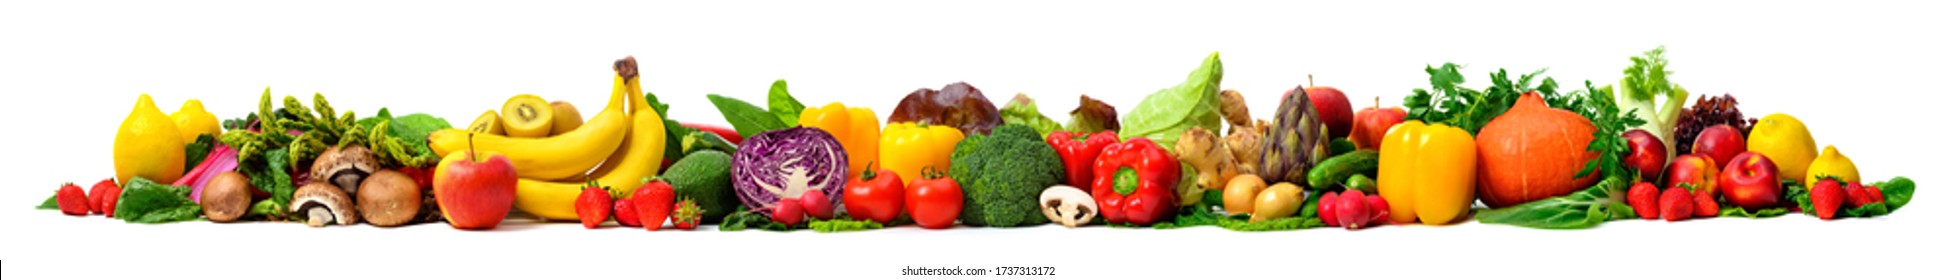 Arrangement of fruits and vegetables in many appetizing colors in a row, concept for a healthy plant-based lifestyle and fitness, super wide format ideal as a border, frame or banner